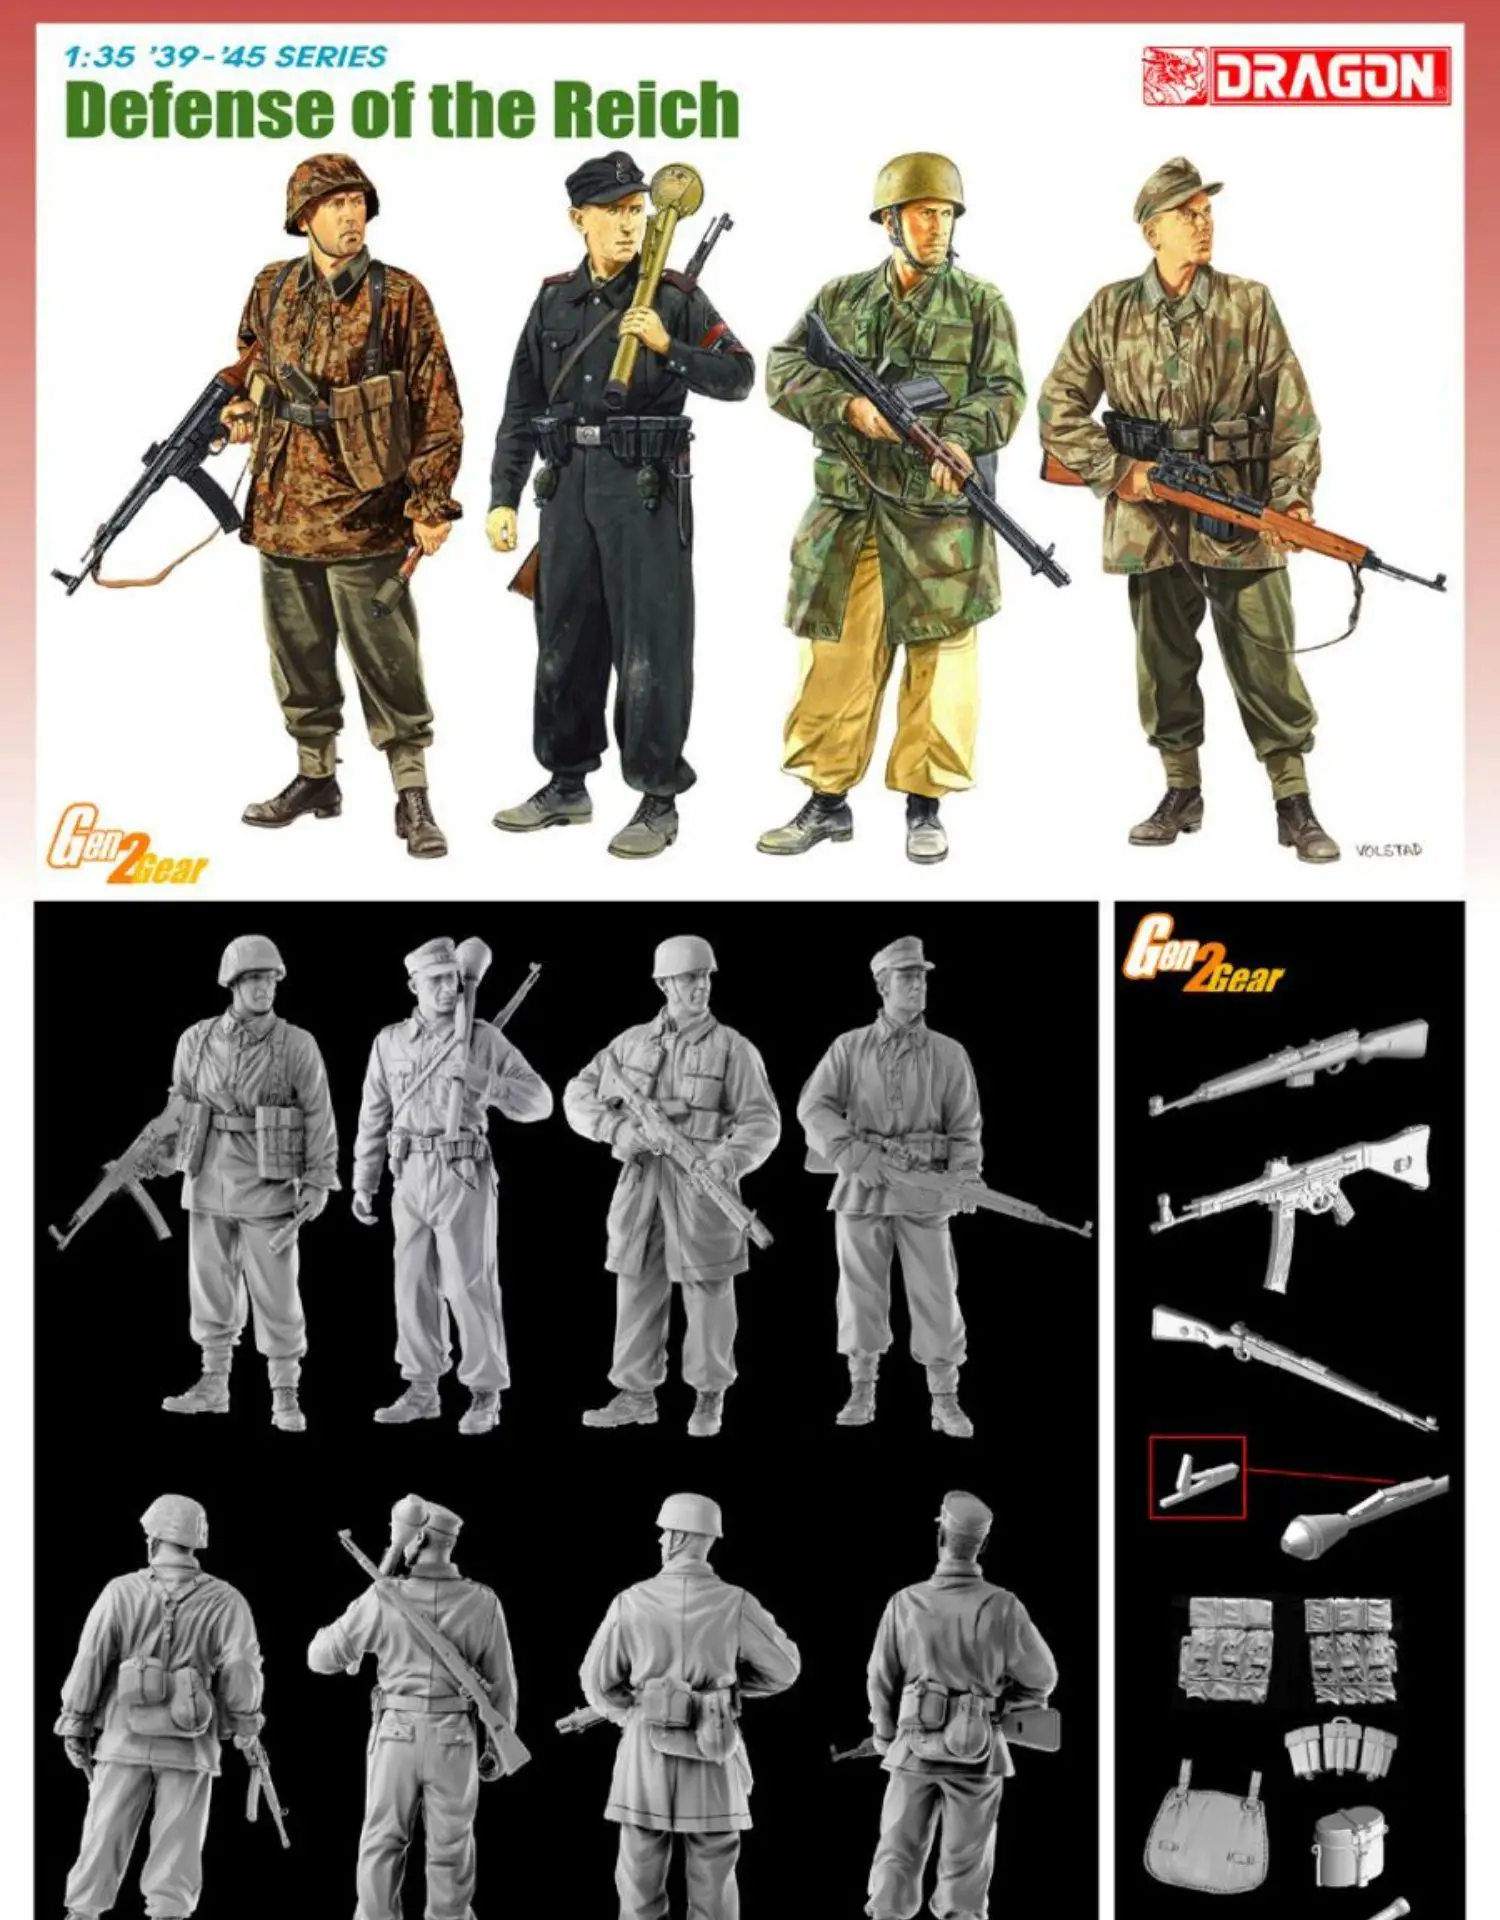 

Dragon 6694 1/35 39-45 SERIES Defense of the Reich model kit